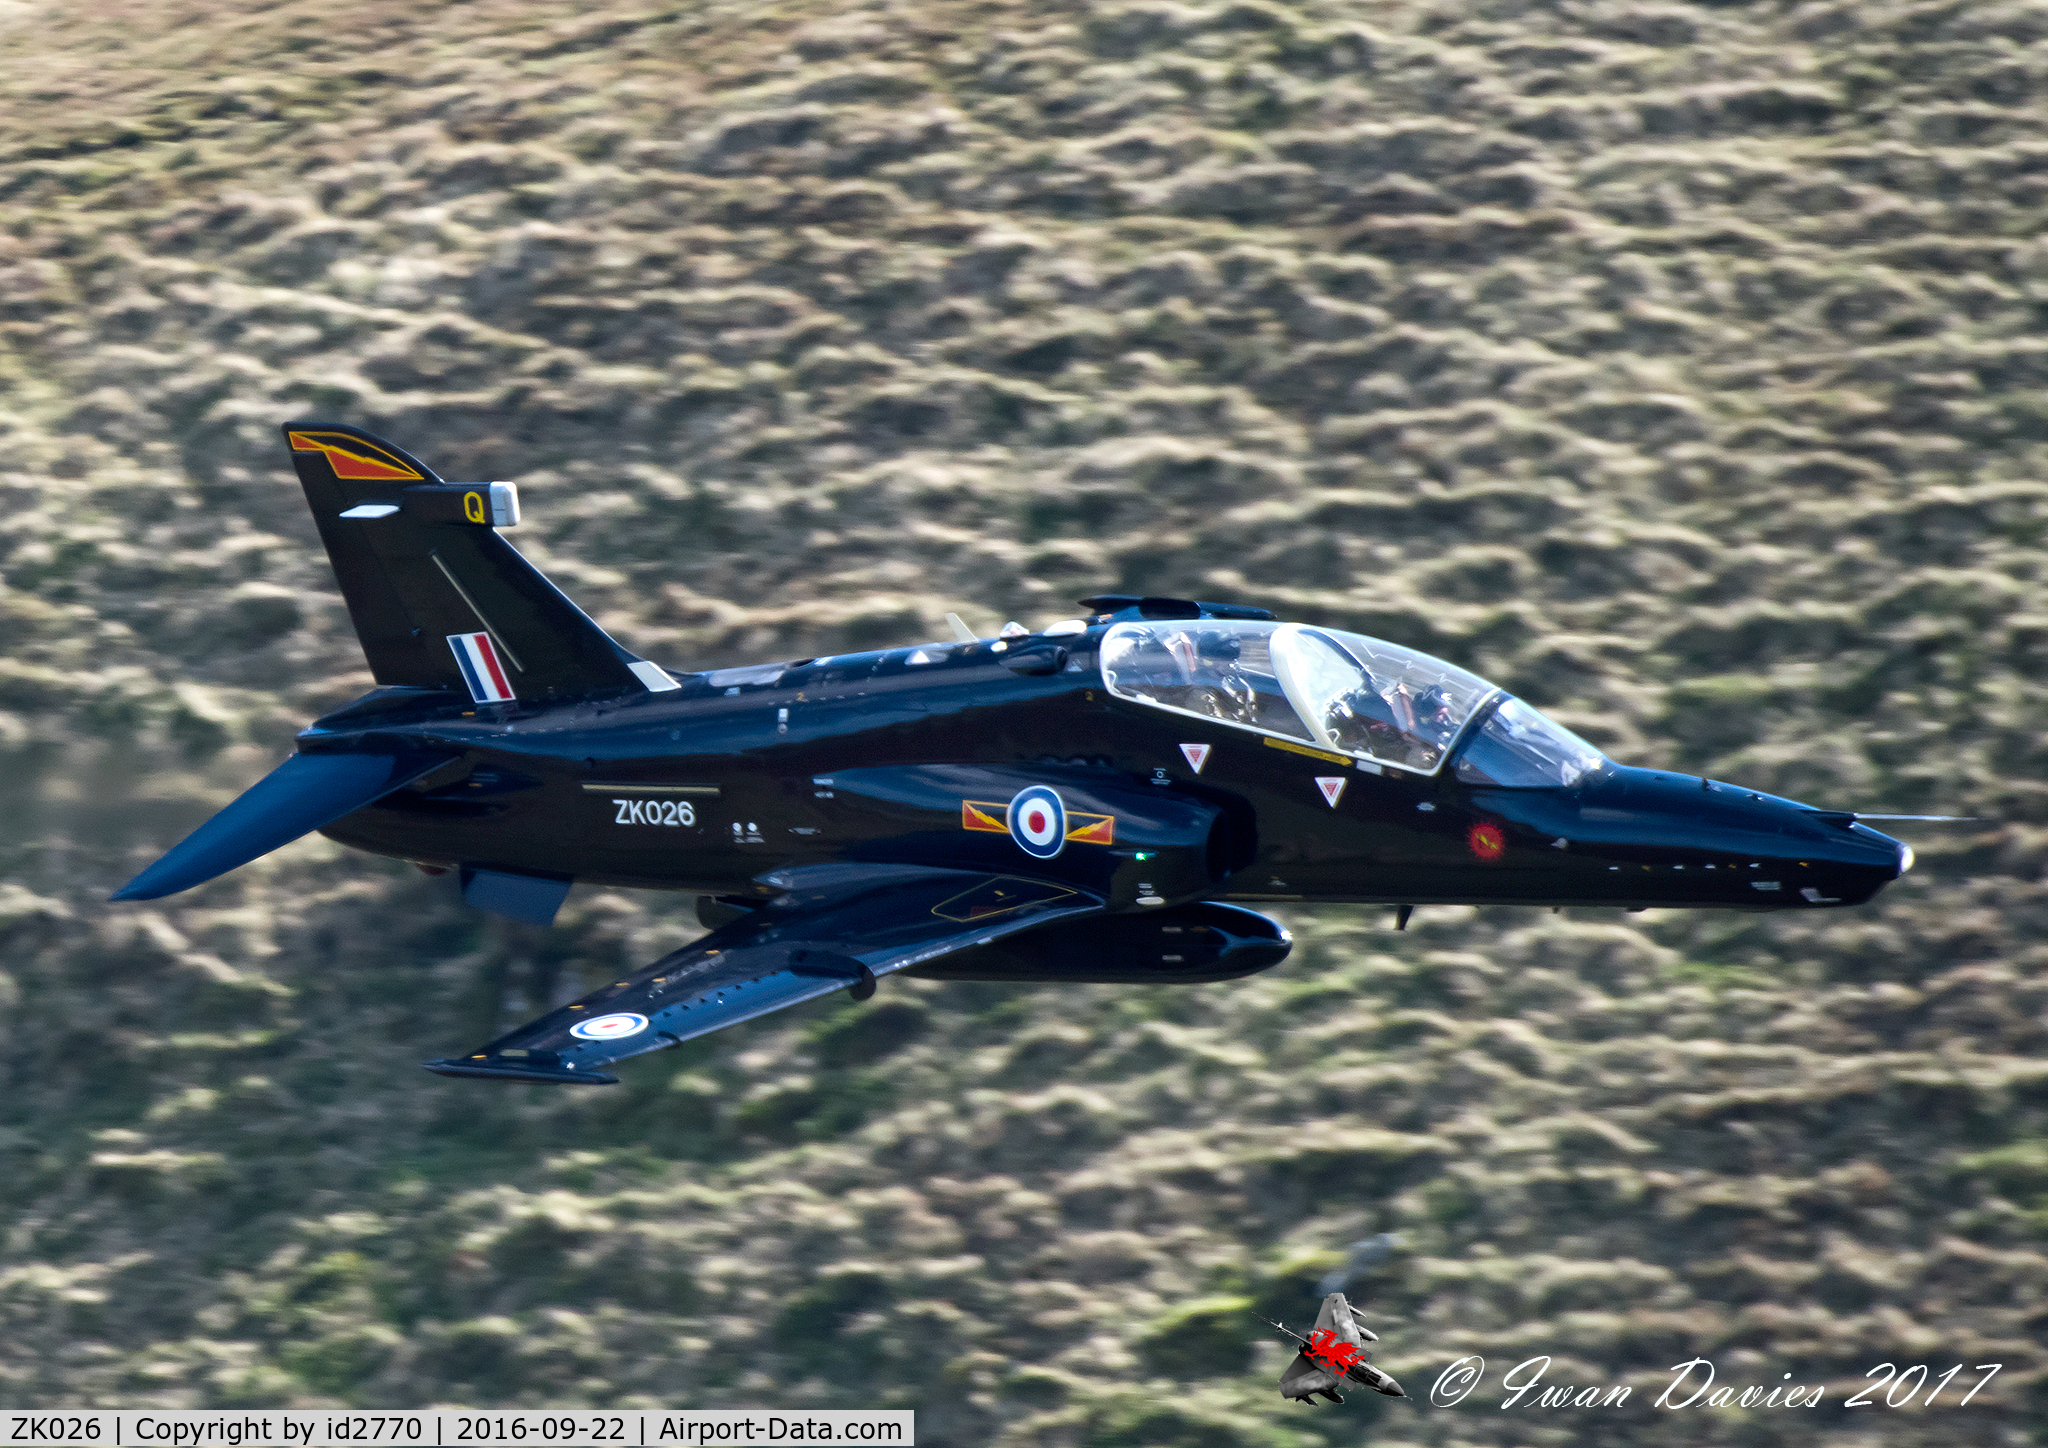 ZK026, 2009 British Aerospace Hawk T2 C/N RT017/1255, ZK026 entering the Mach Loop from the North